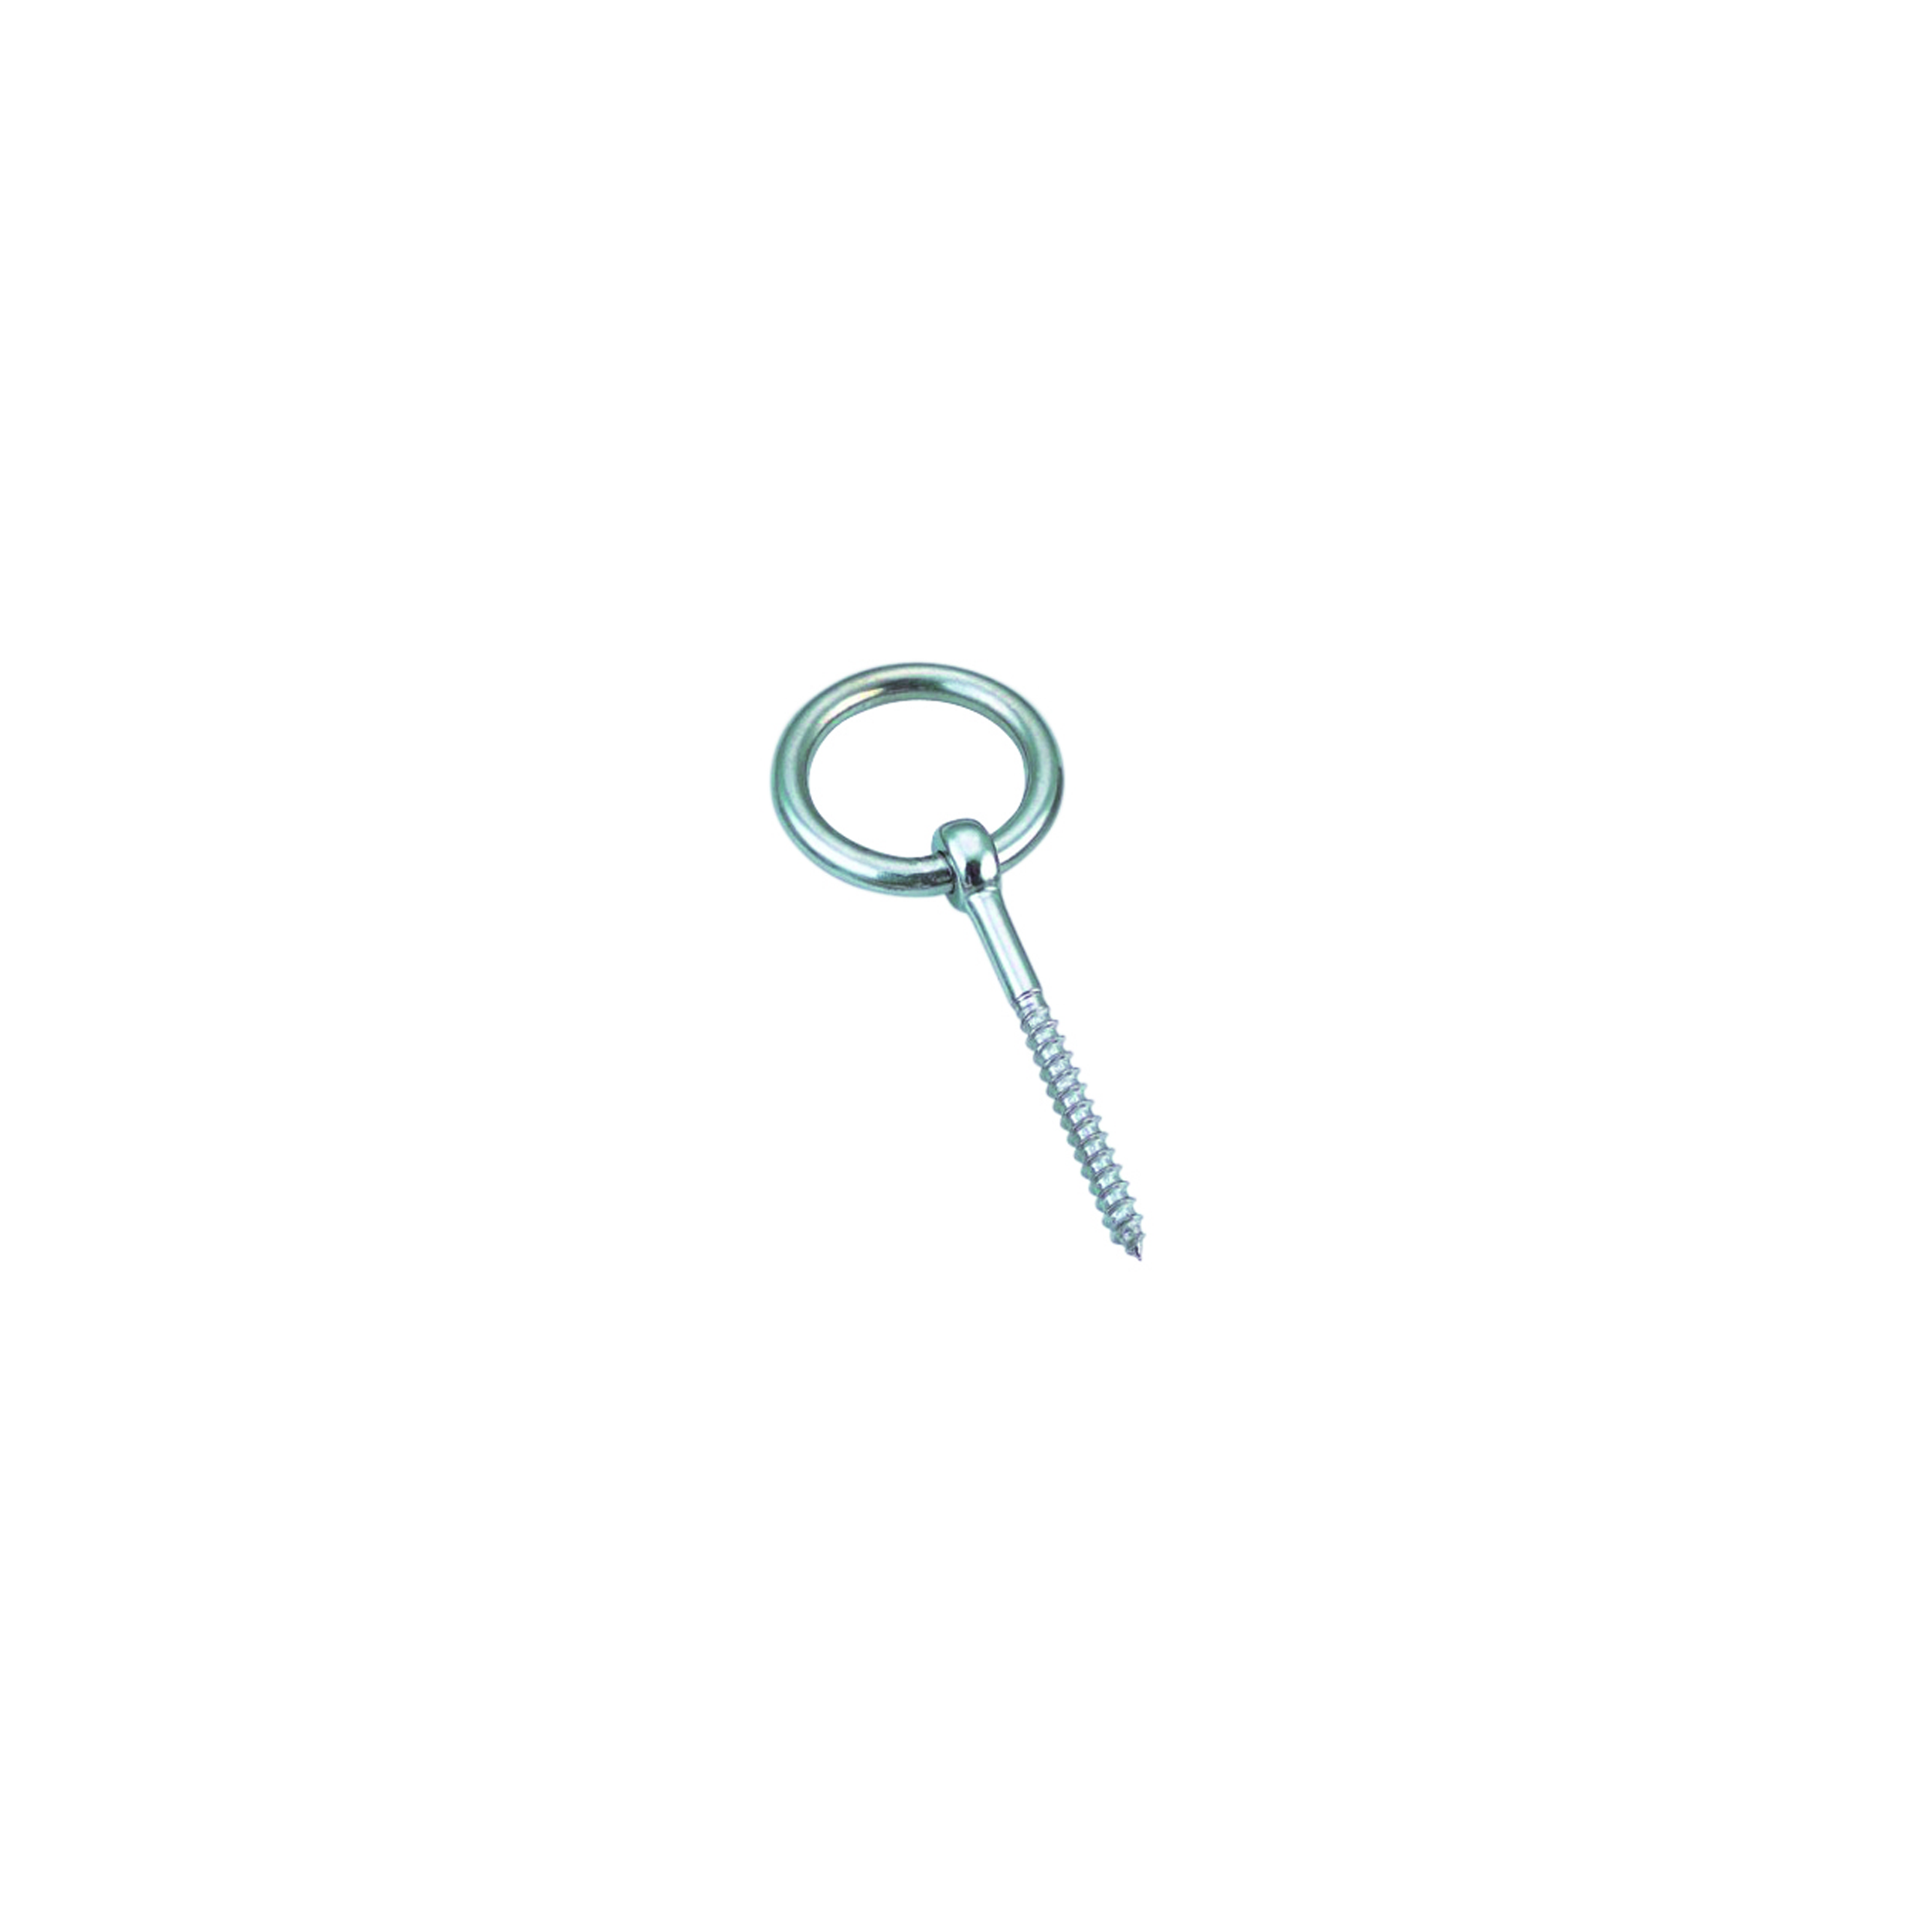 Eyebolt with wood thread and ring A4  bolt 6x60mm, ring 6x30mm